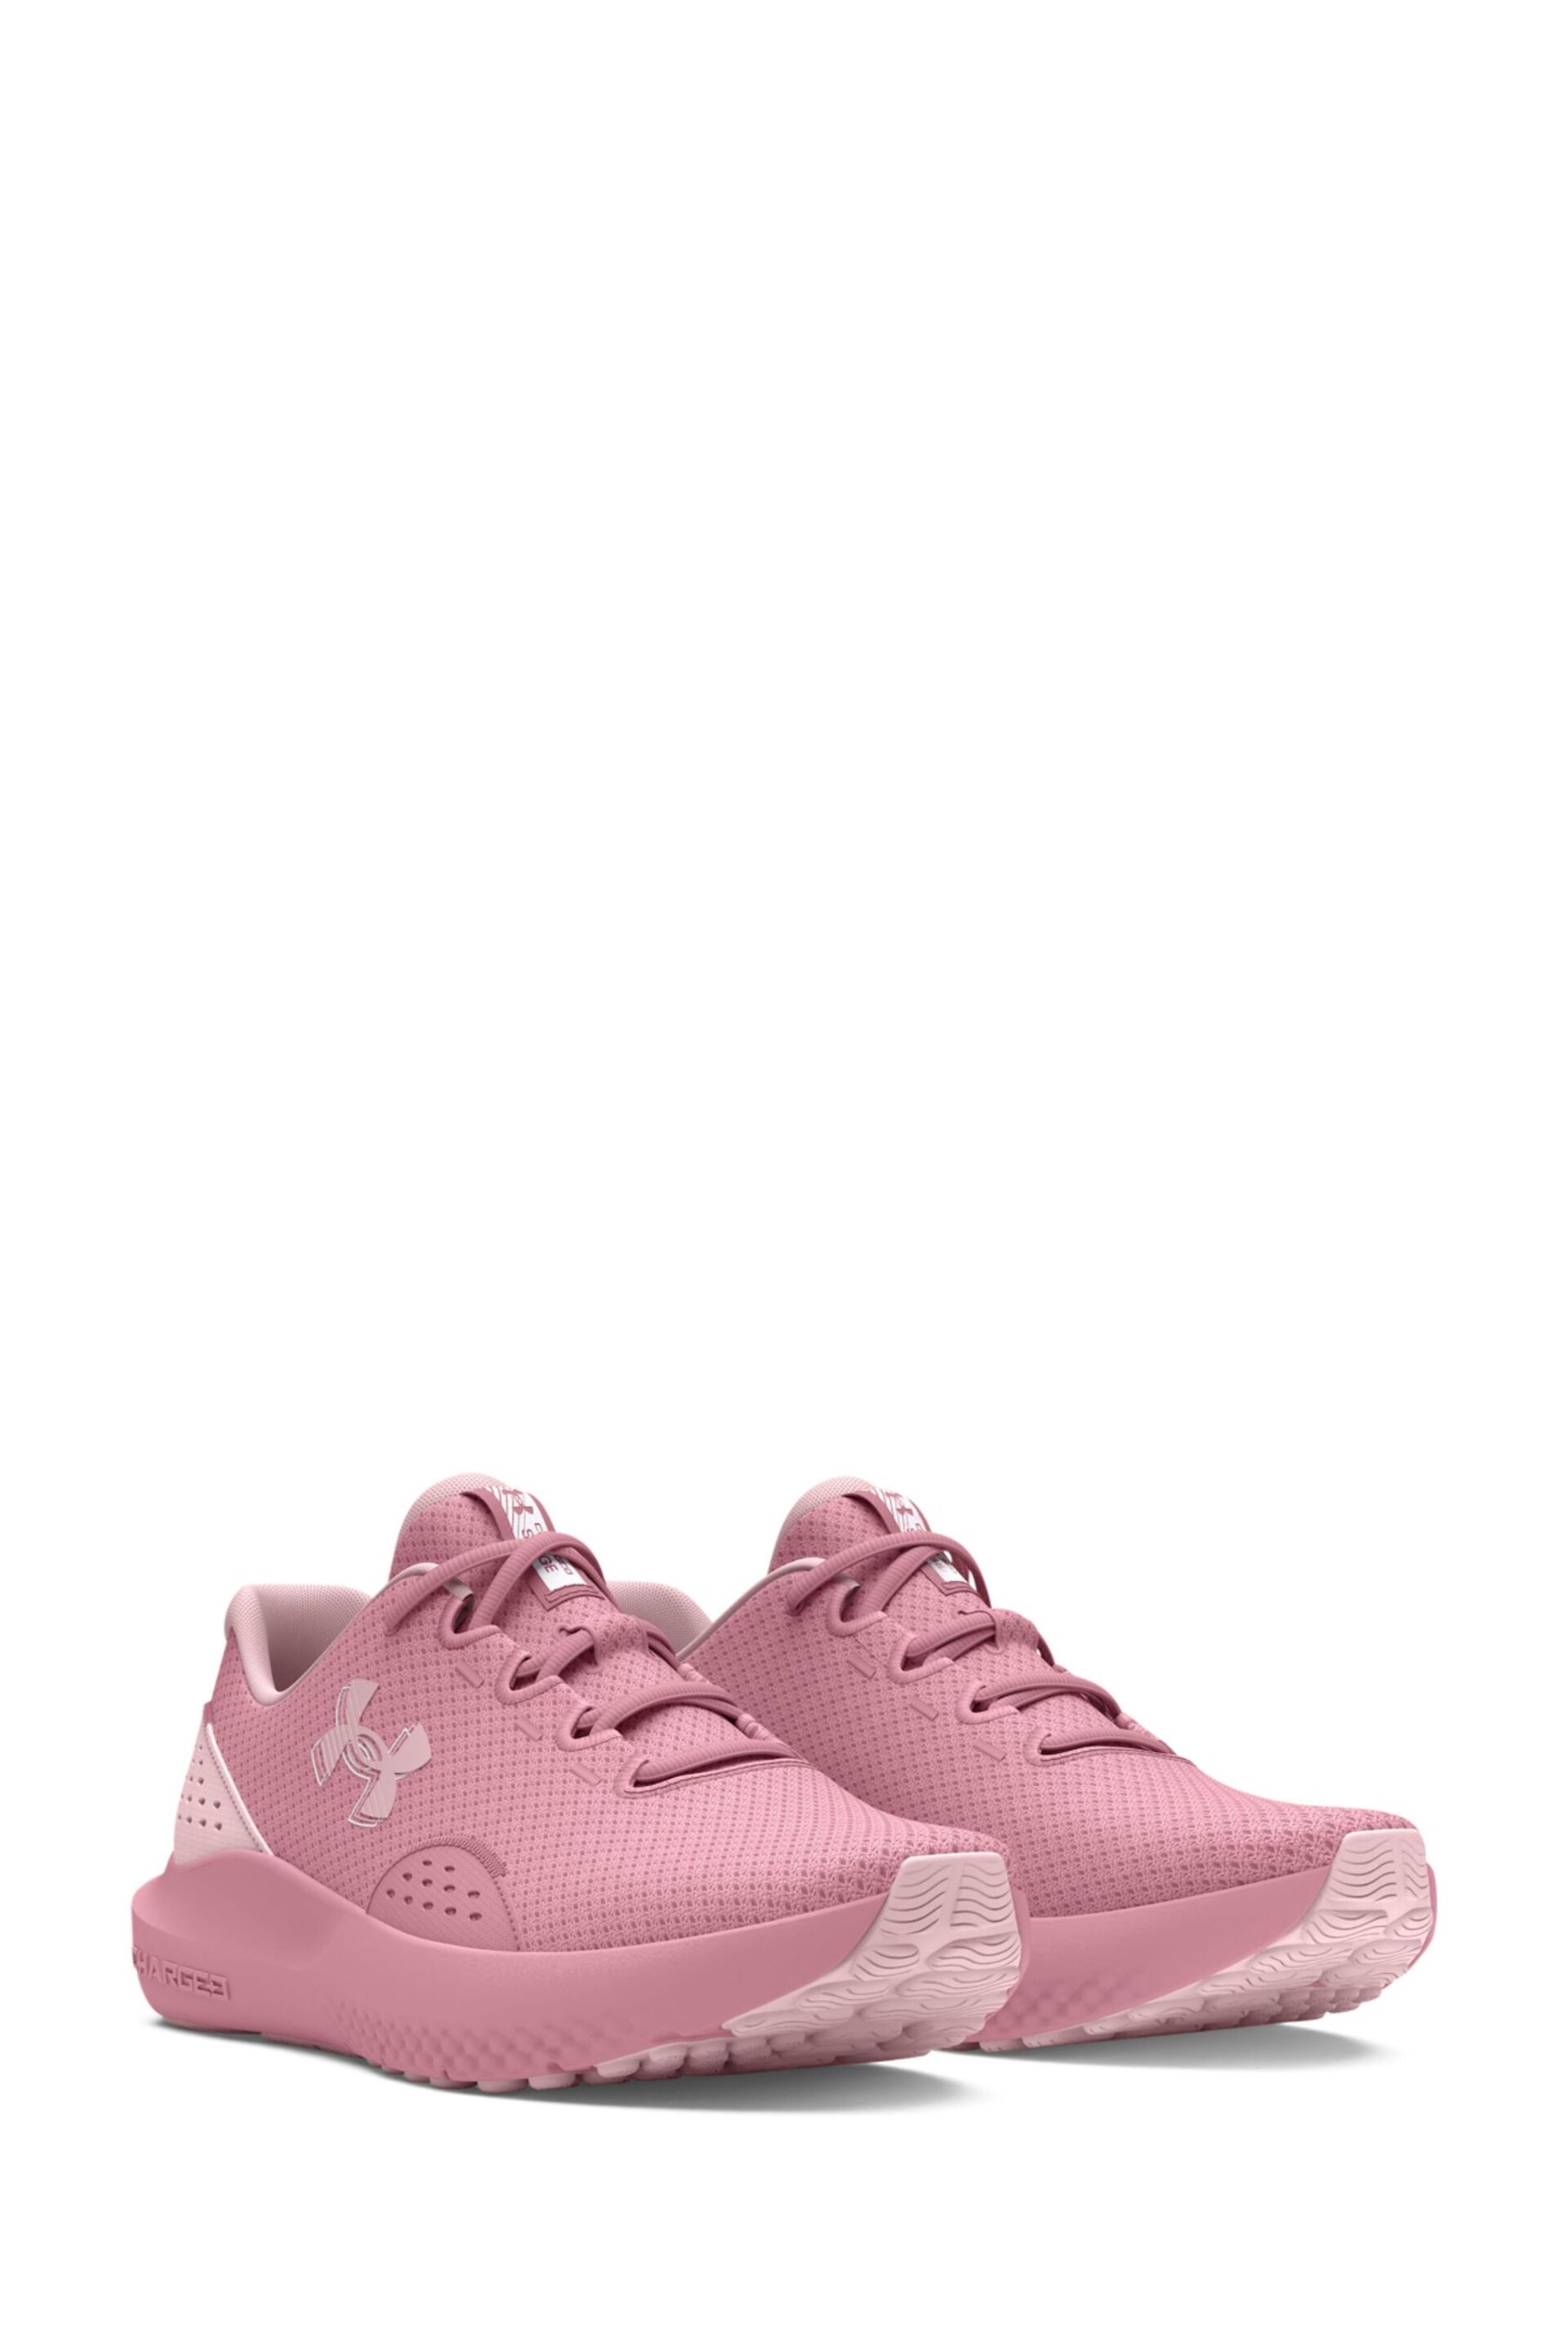 Under Armour Pink Charged Surge Trainers - Image 4 of 6